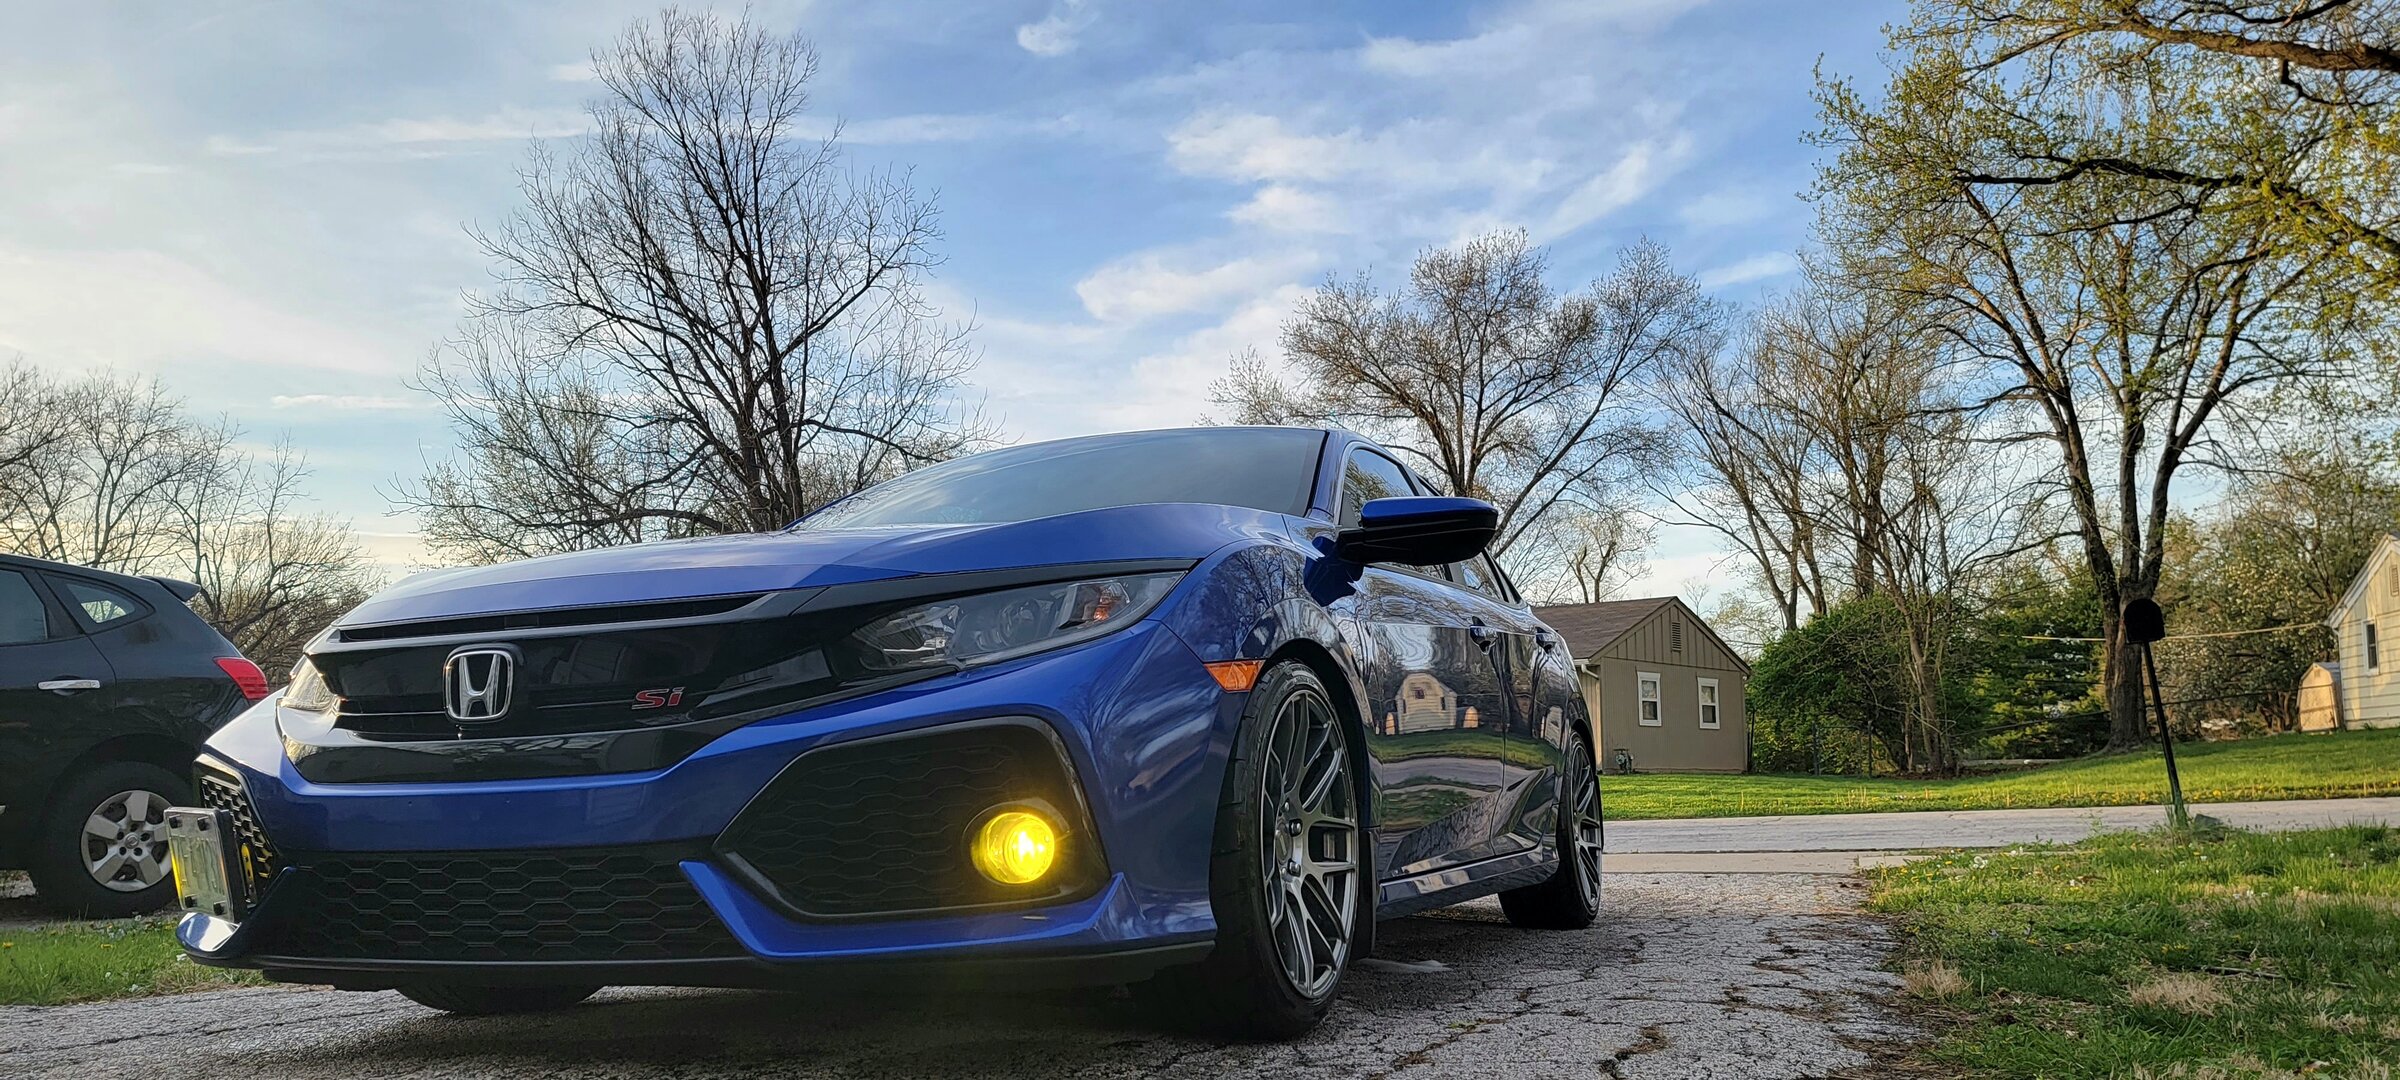 Honda Civic 10th gen What's your SI looking like today? 20220424_192704